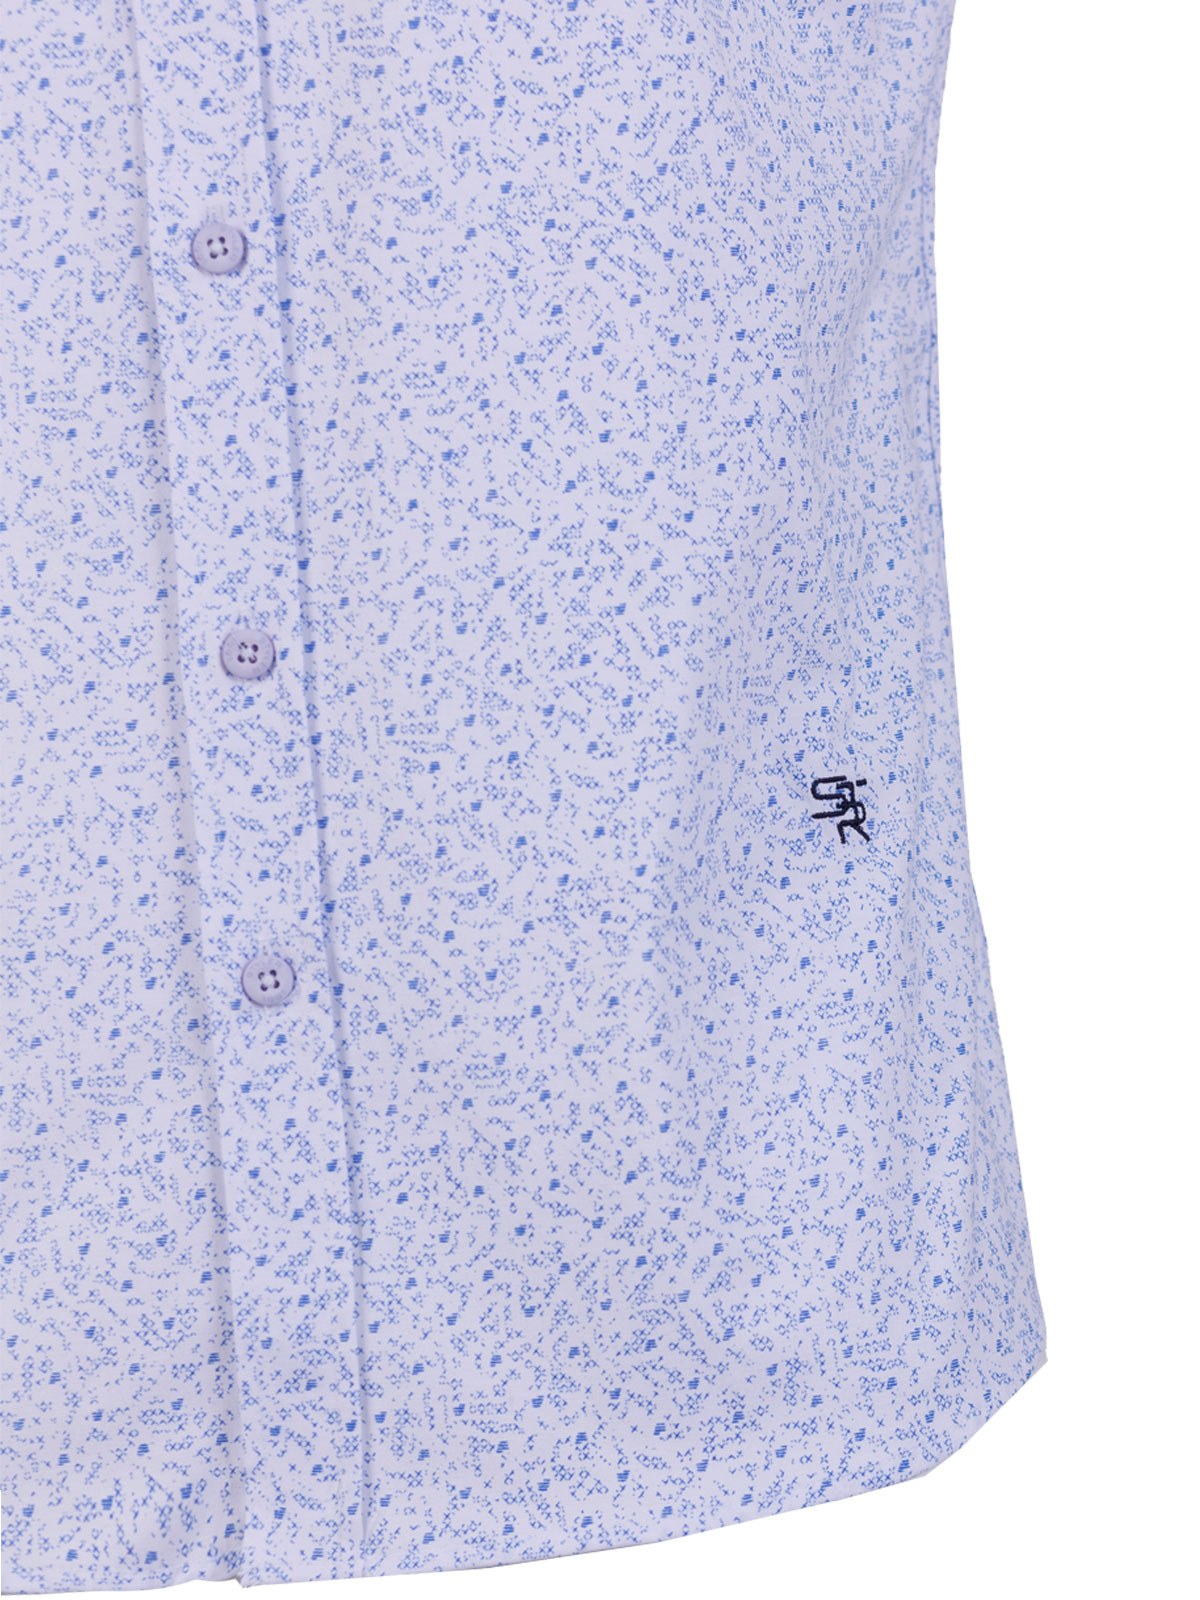 Shirt in white with small blue figures - 80231 € 38.81 img2